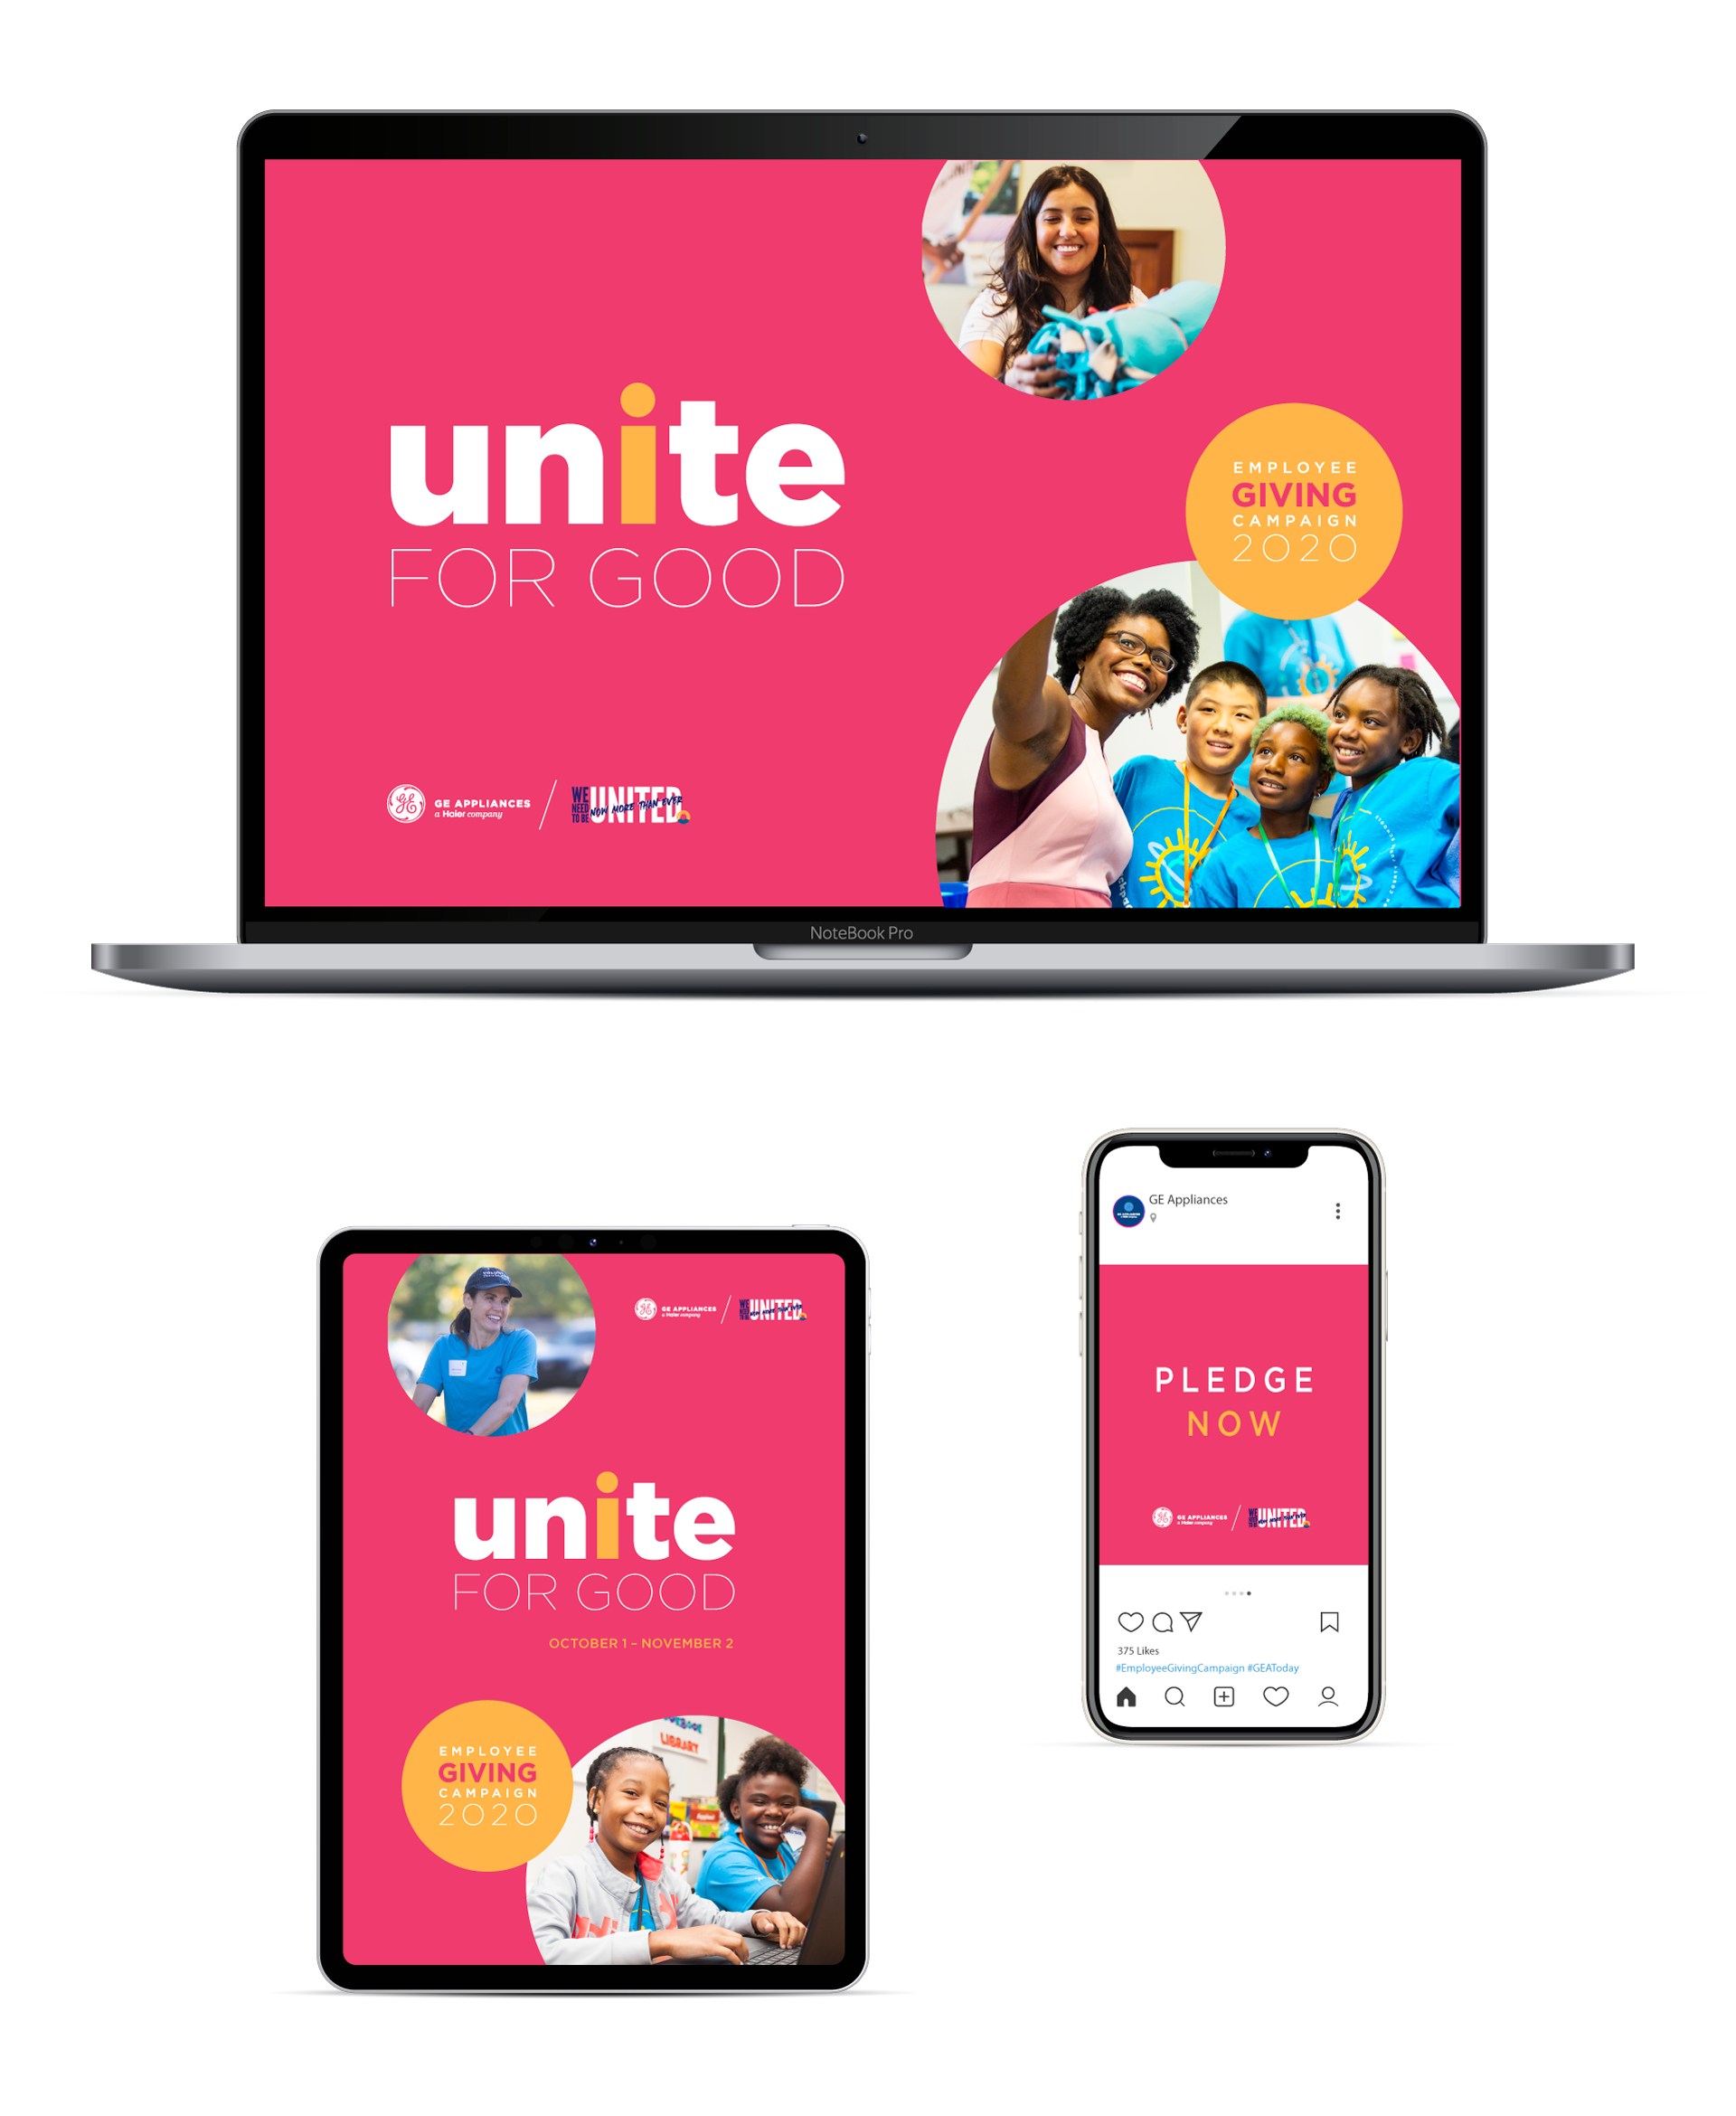 United for Good brand on laptop, tablet, and in Instagram on a mobile device